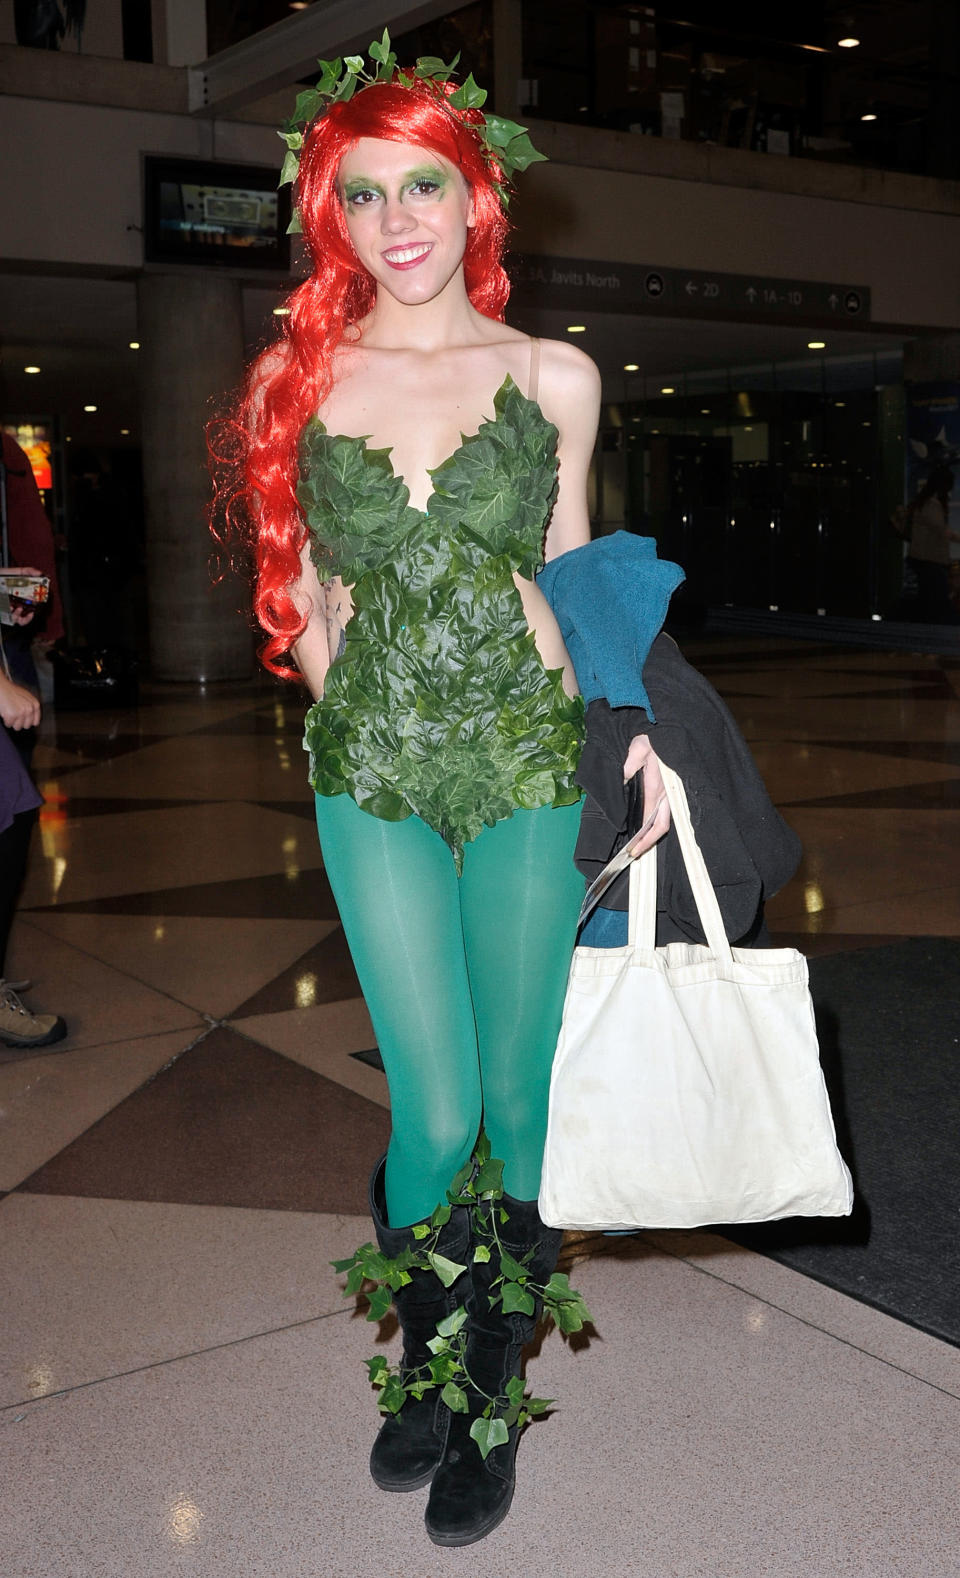 A Comic Con attendee wearing a Poison Ivy costume poses during the 2012 New York Comic Con at the Javits Center on October 11, 2012 in New York City. (Photo by Daniel Zuchnik/Getty Images)